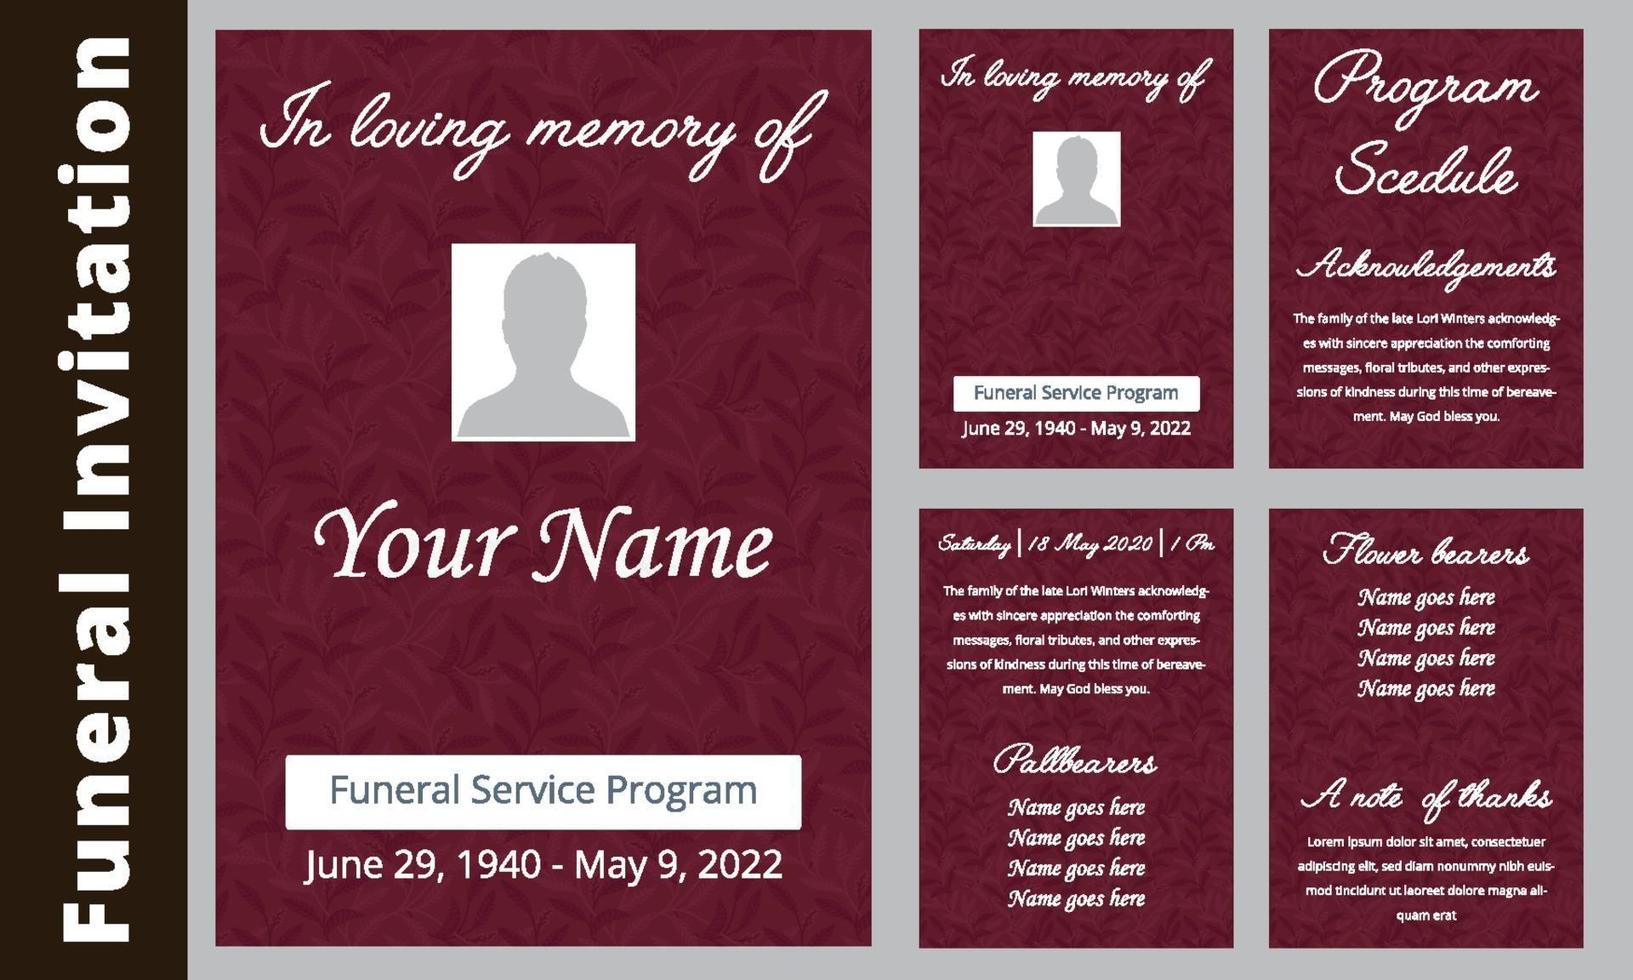 Botanical memorial and funeral invitation card template design vector